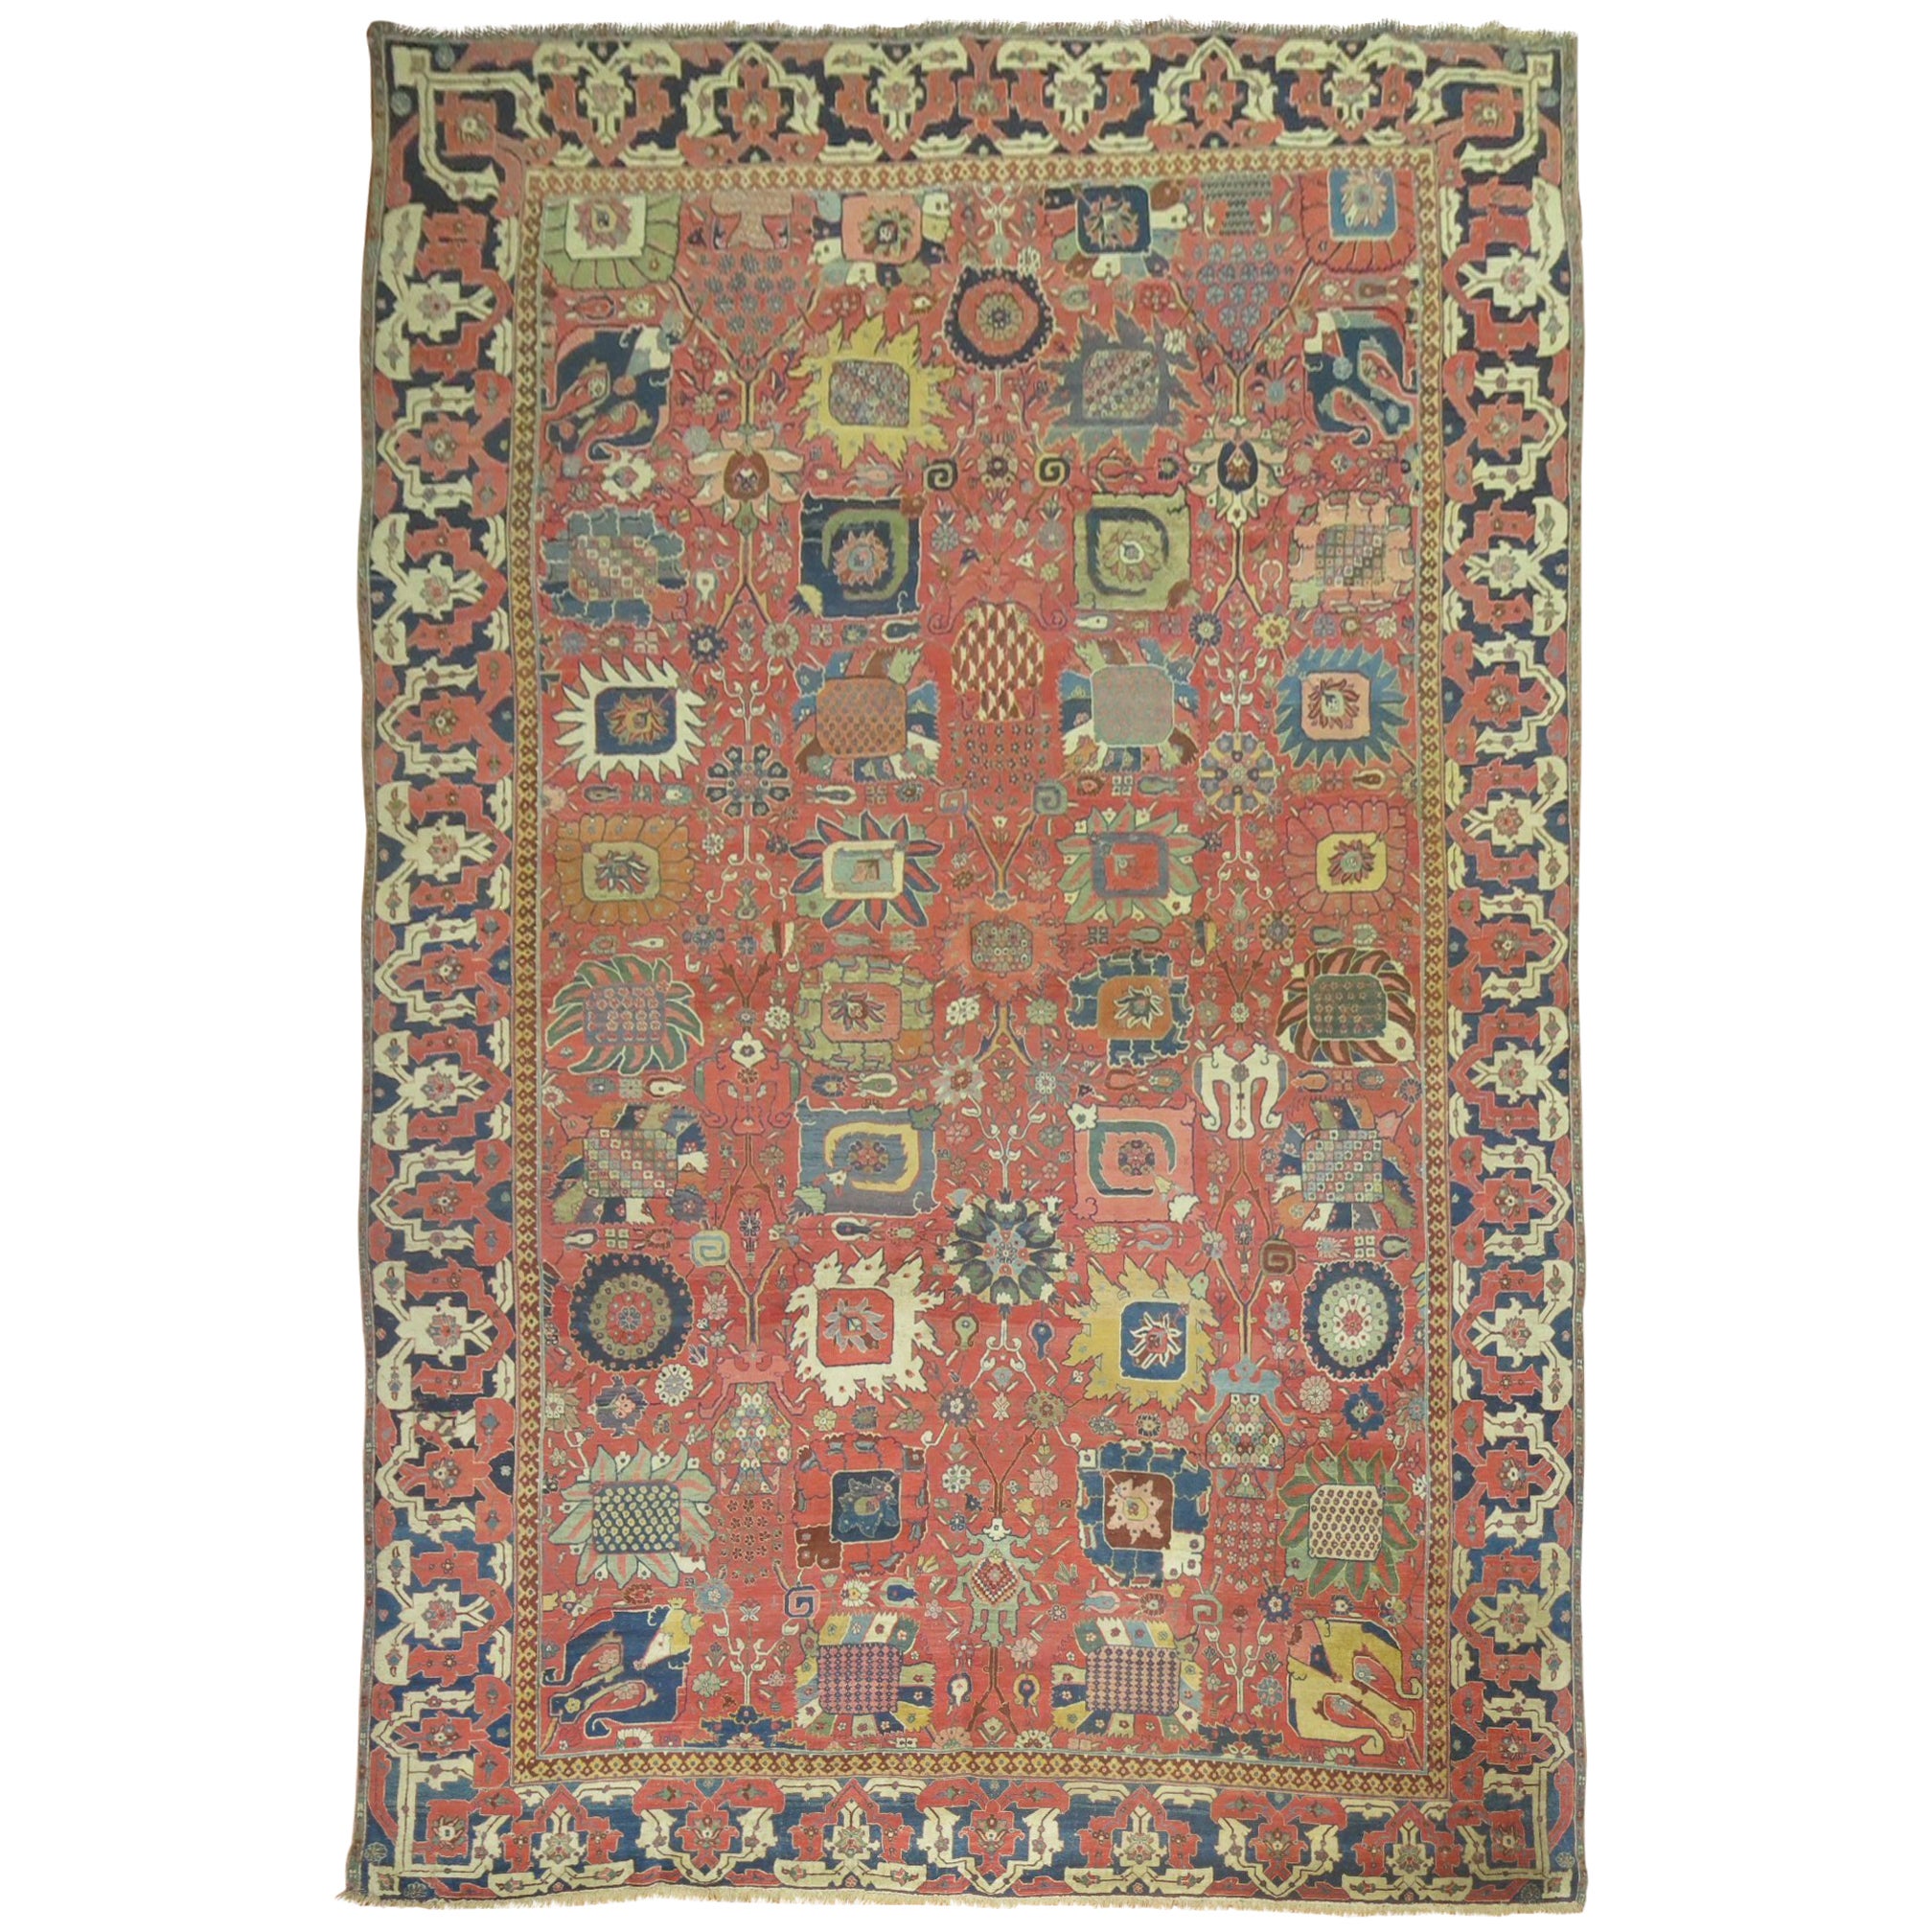 An early 19th-late 18th century antique Persian Bidjar carpet. The culmination of a centuries-old weaving tradition, the finest Bidjar antique rugs woven late 19th century or before are grand works of refined art, yet they possess tribal elements in